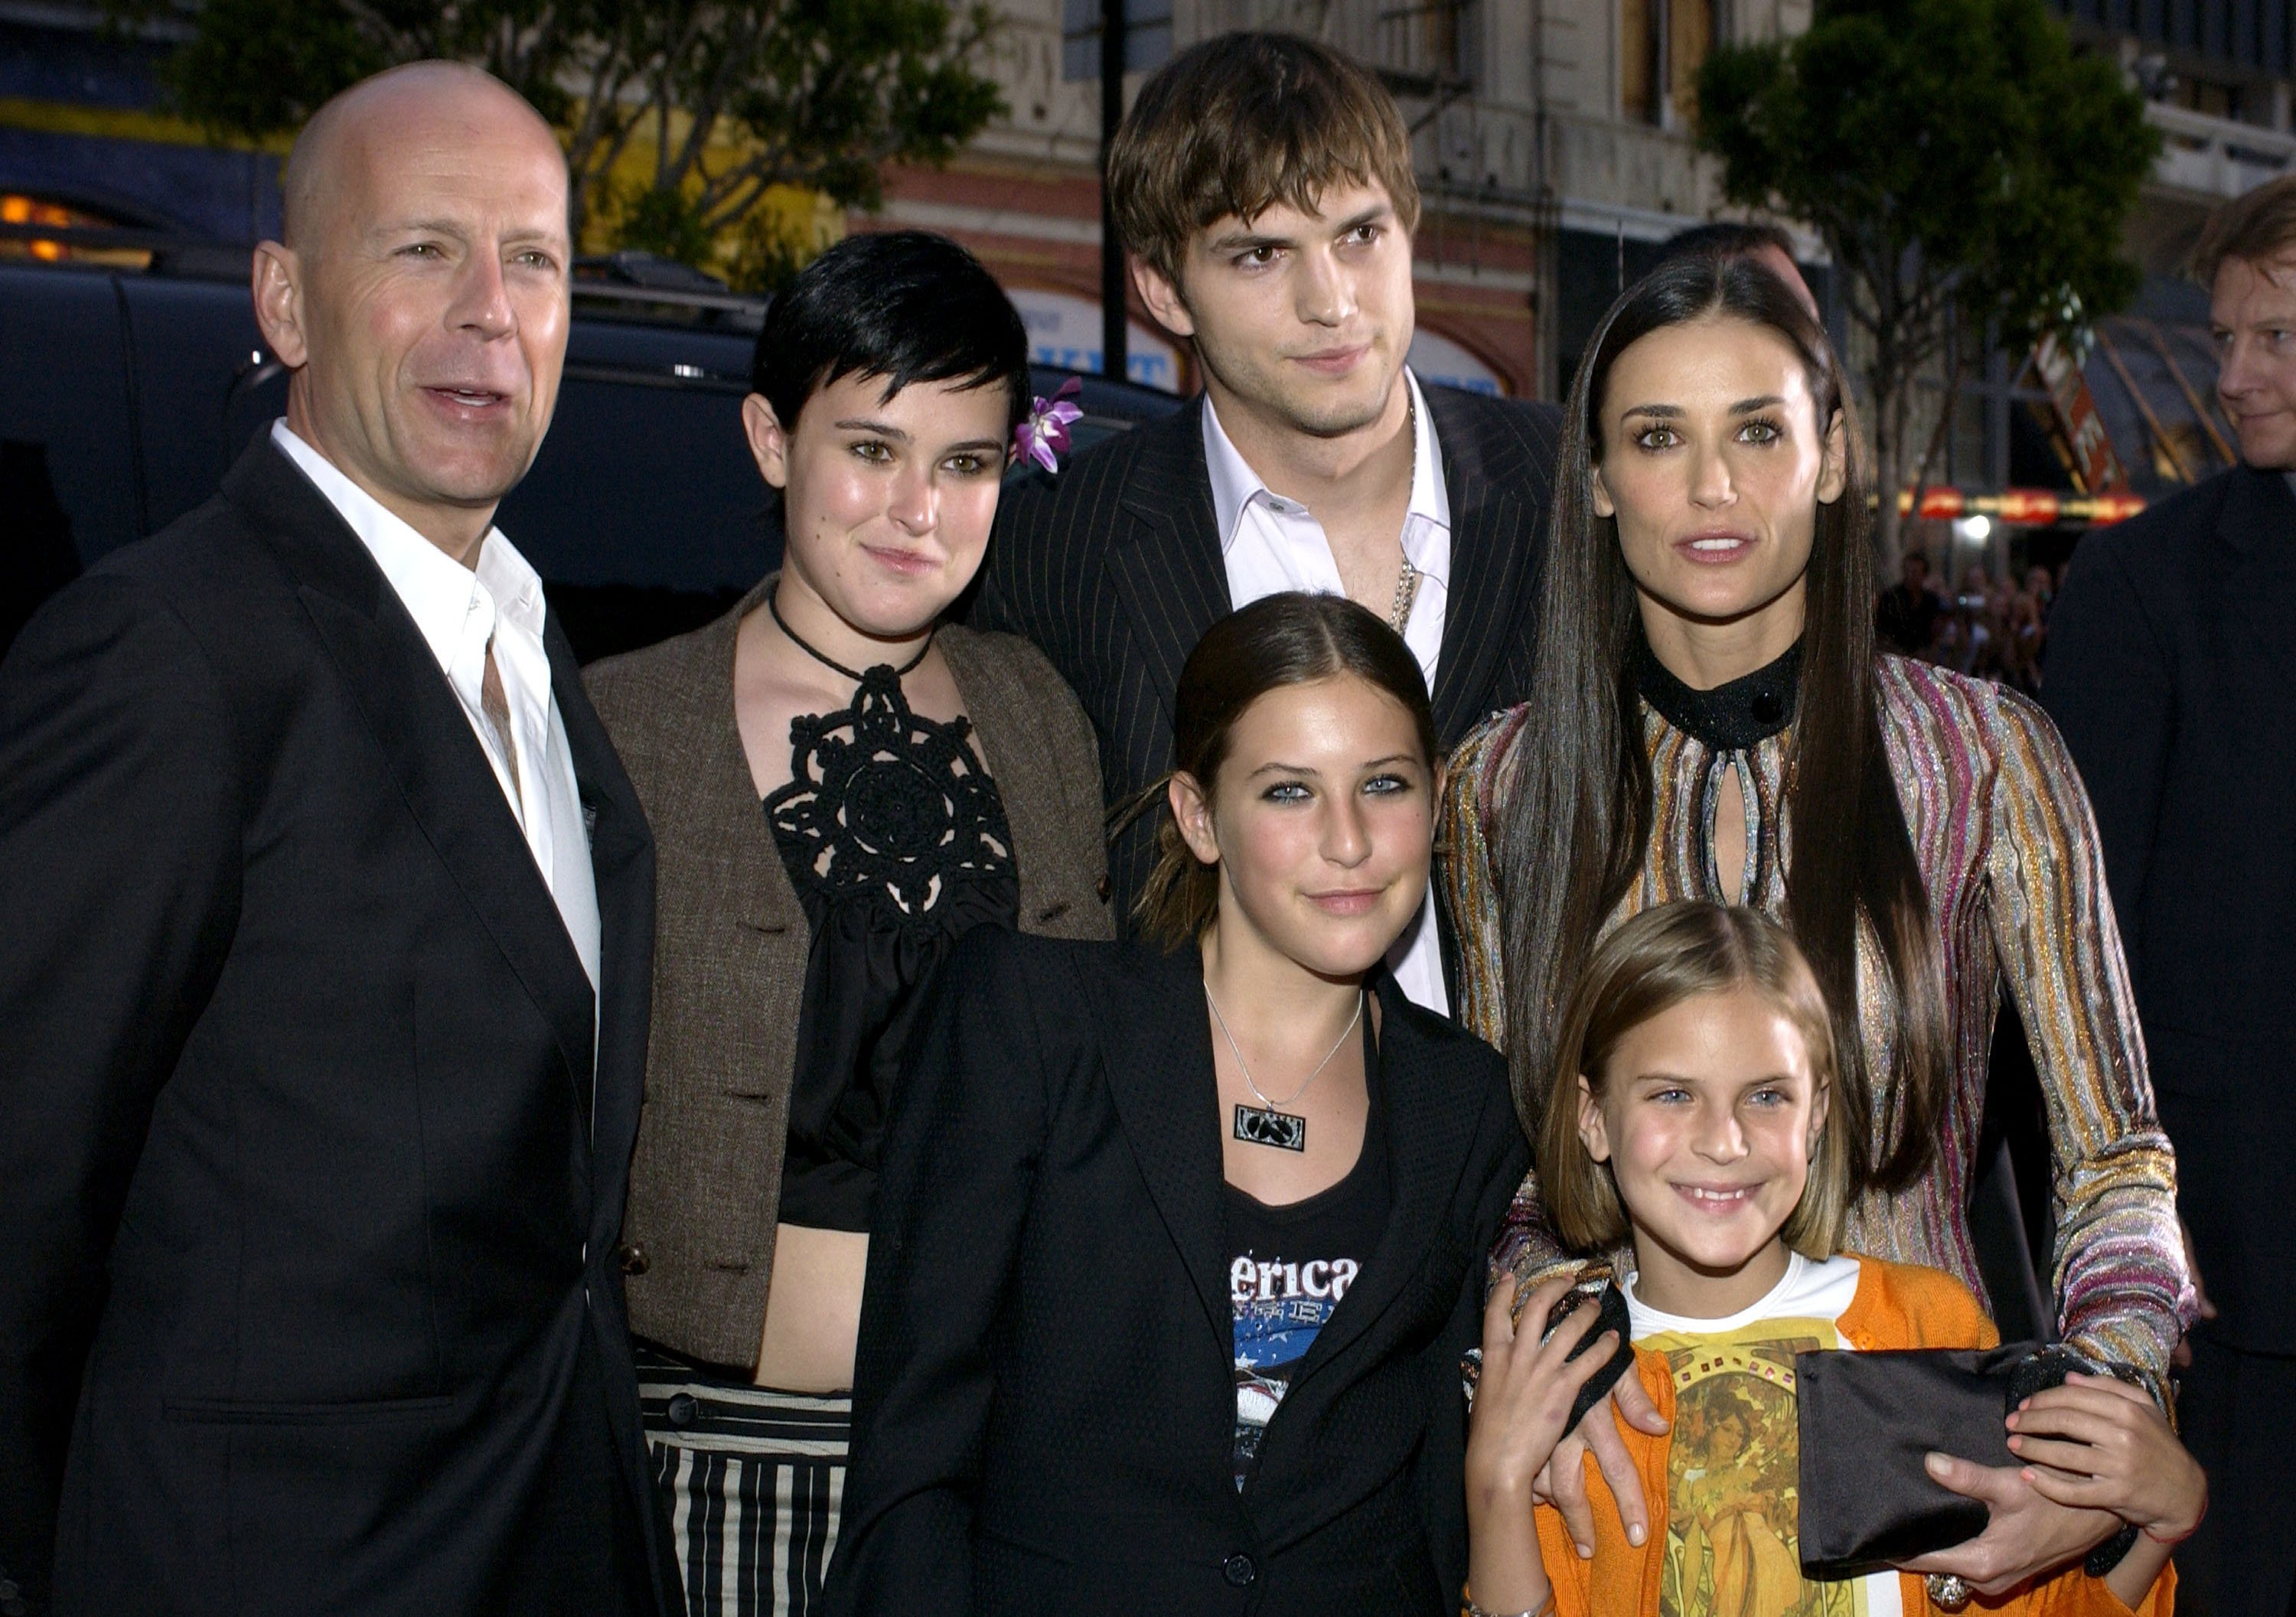 Bruce Willis, Ashton Kutcher and Demi Moore with daughters  Rumer Willis, Scout Willis and Talulah Willis at the"Charlie's Angels 2 - Full Throttle" Premiere in 2003 | Source: Getty Images